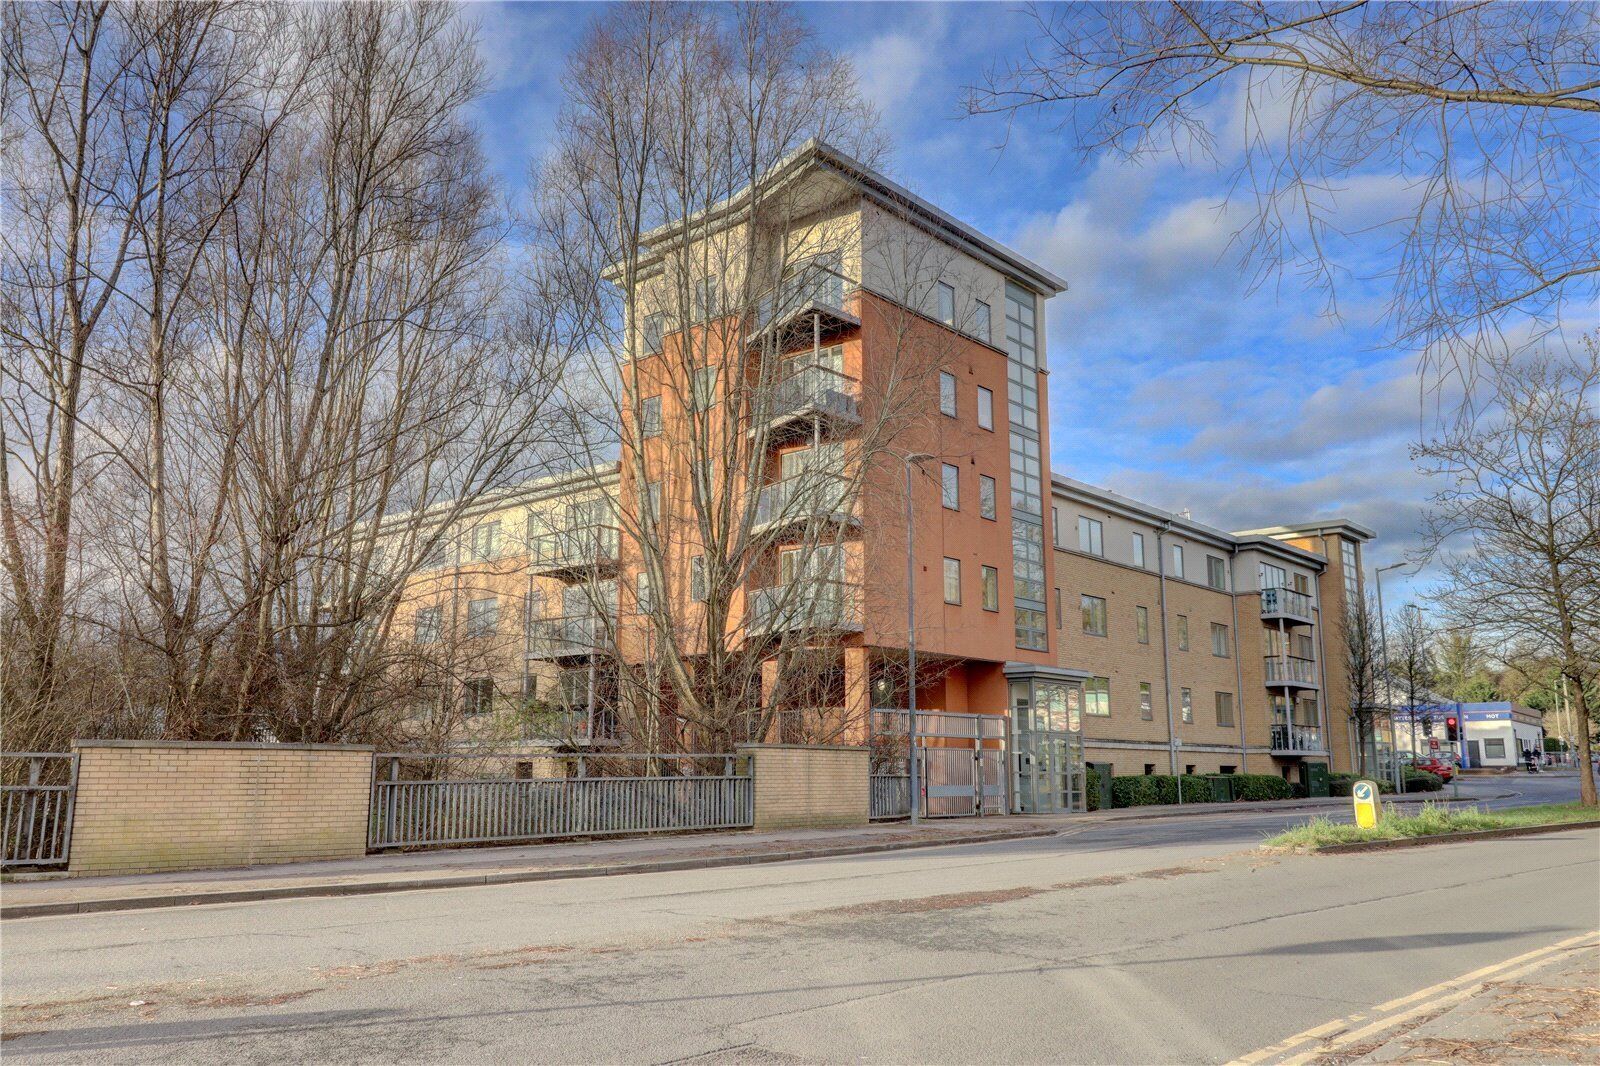 2 bedroom  flat to rent, Available now Ryemead Boulevard, High Wycombe, HP11, main image